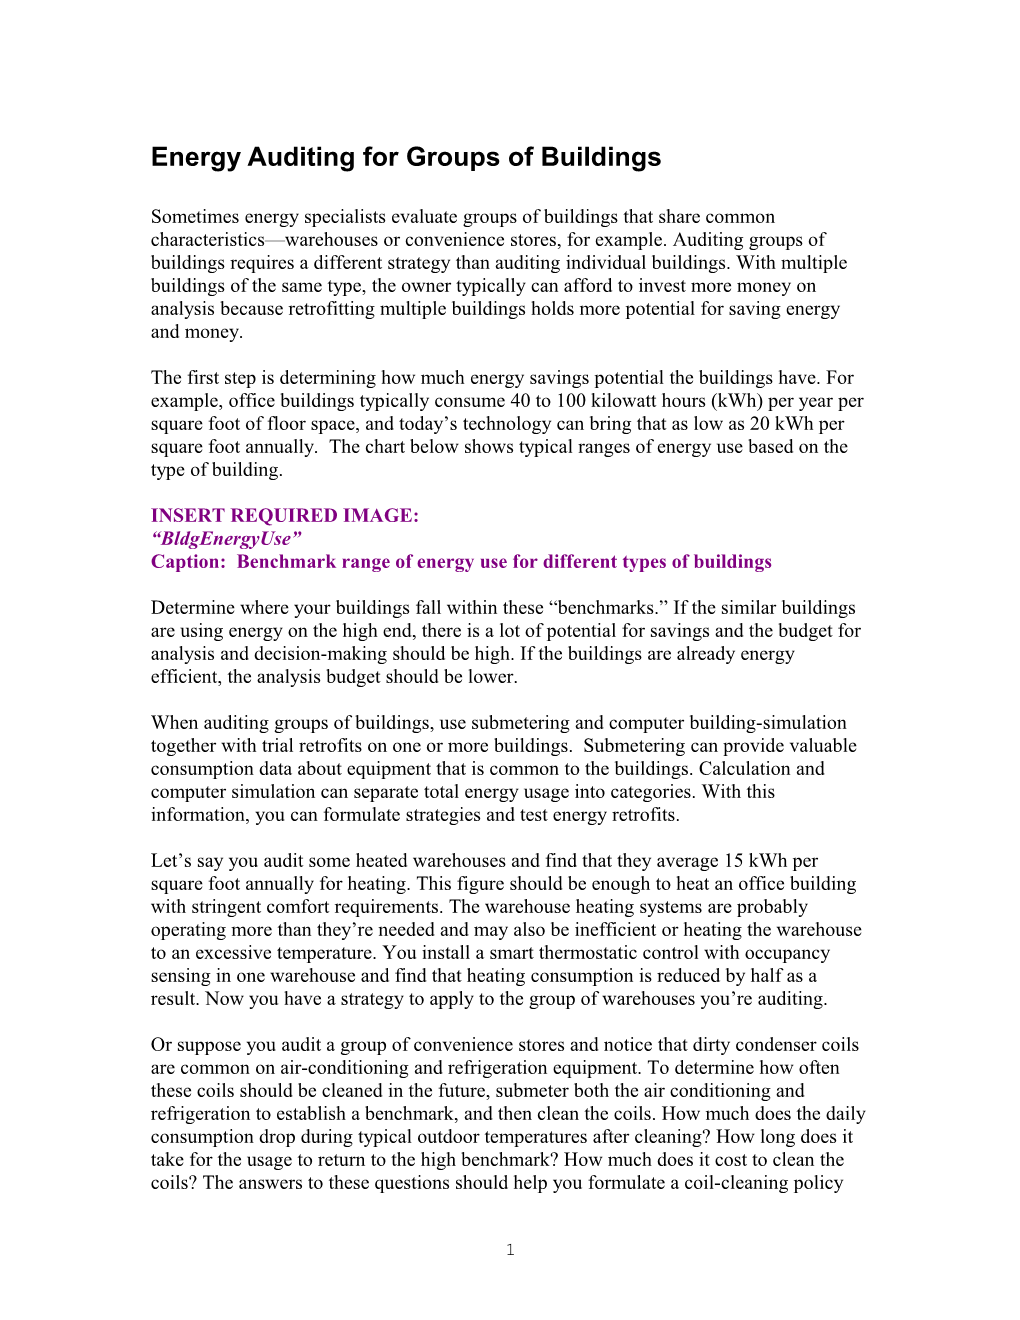 Energy Auditing for Groups of Buildings